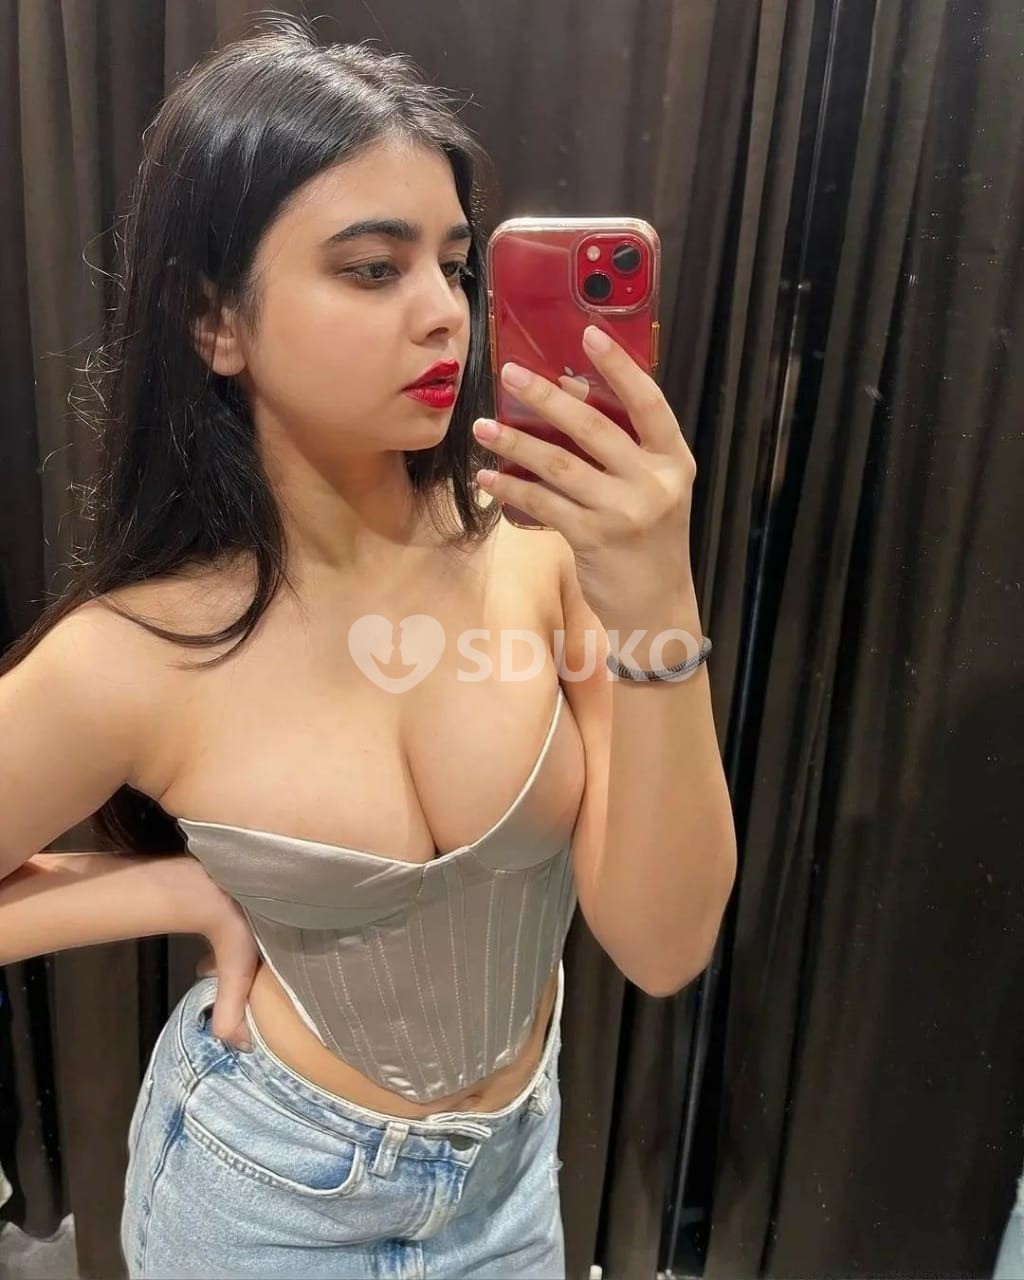 TUMKUR HIGH PROFILE CALL ME DIVYA LOW PRICE UNLIMITED SHOOT 100% GENUINE SEXY VIP CALL GIRLS ARE PROVIDED SECURE SERVICE